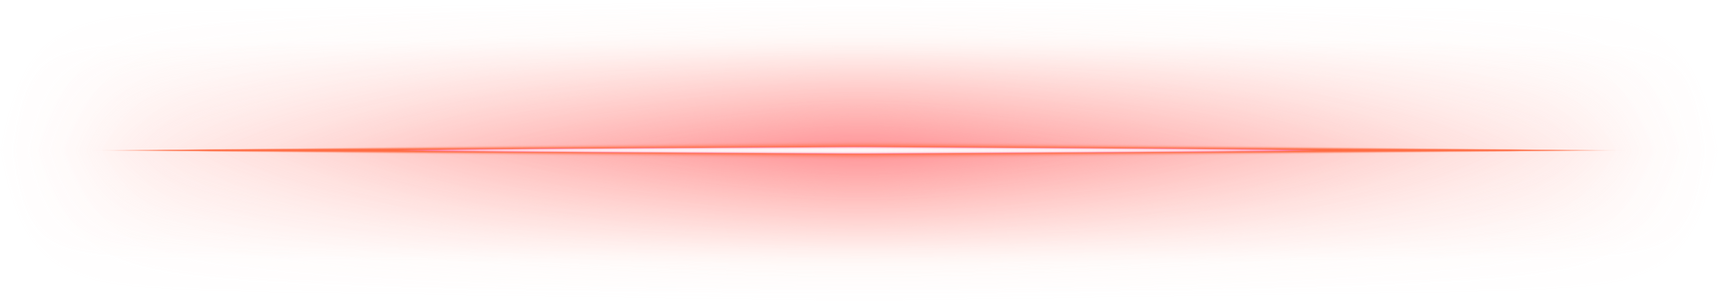 Glowing Red Neon Line Light